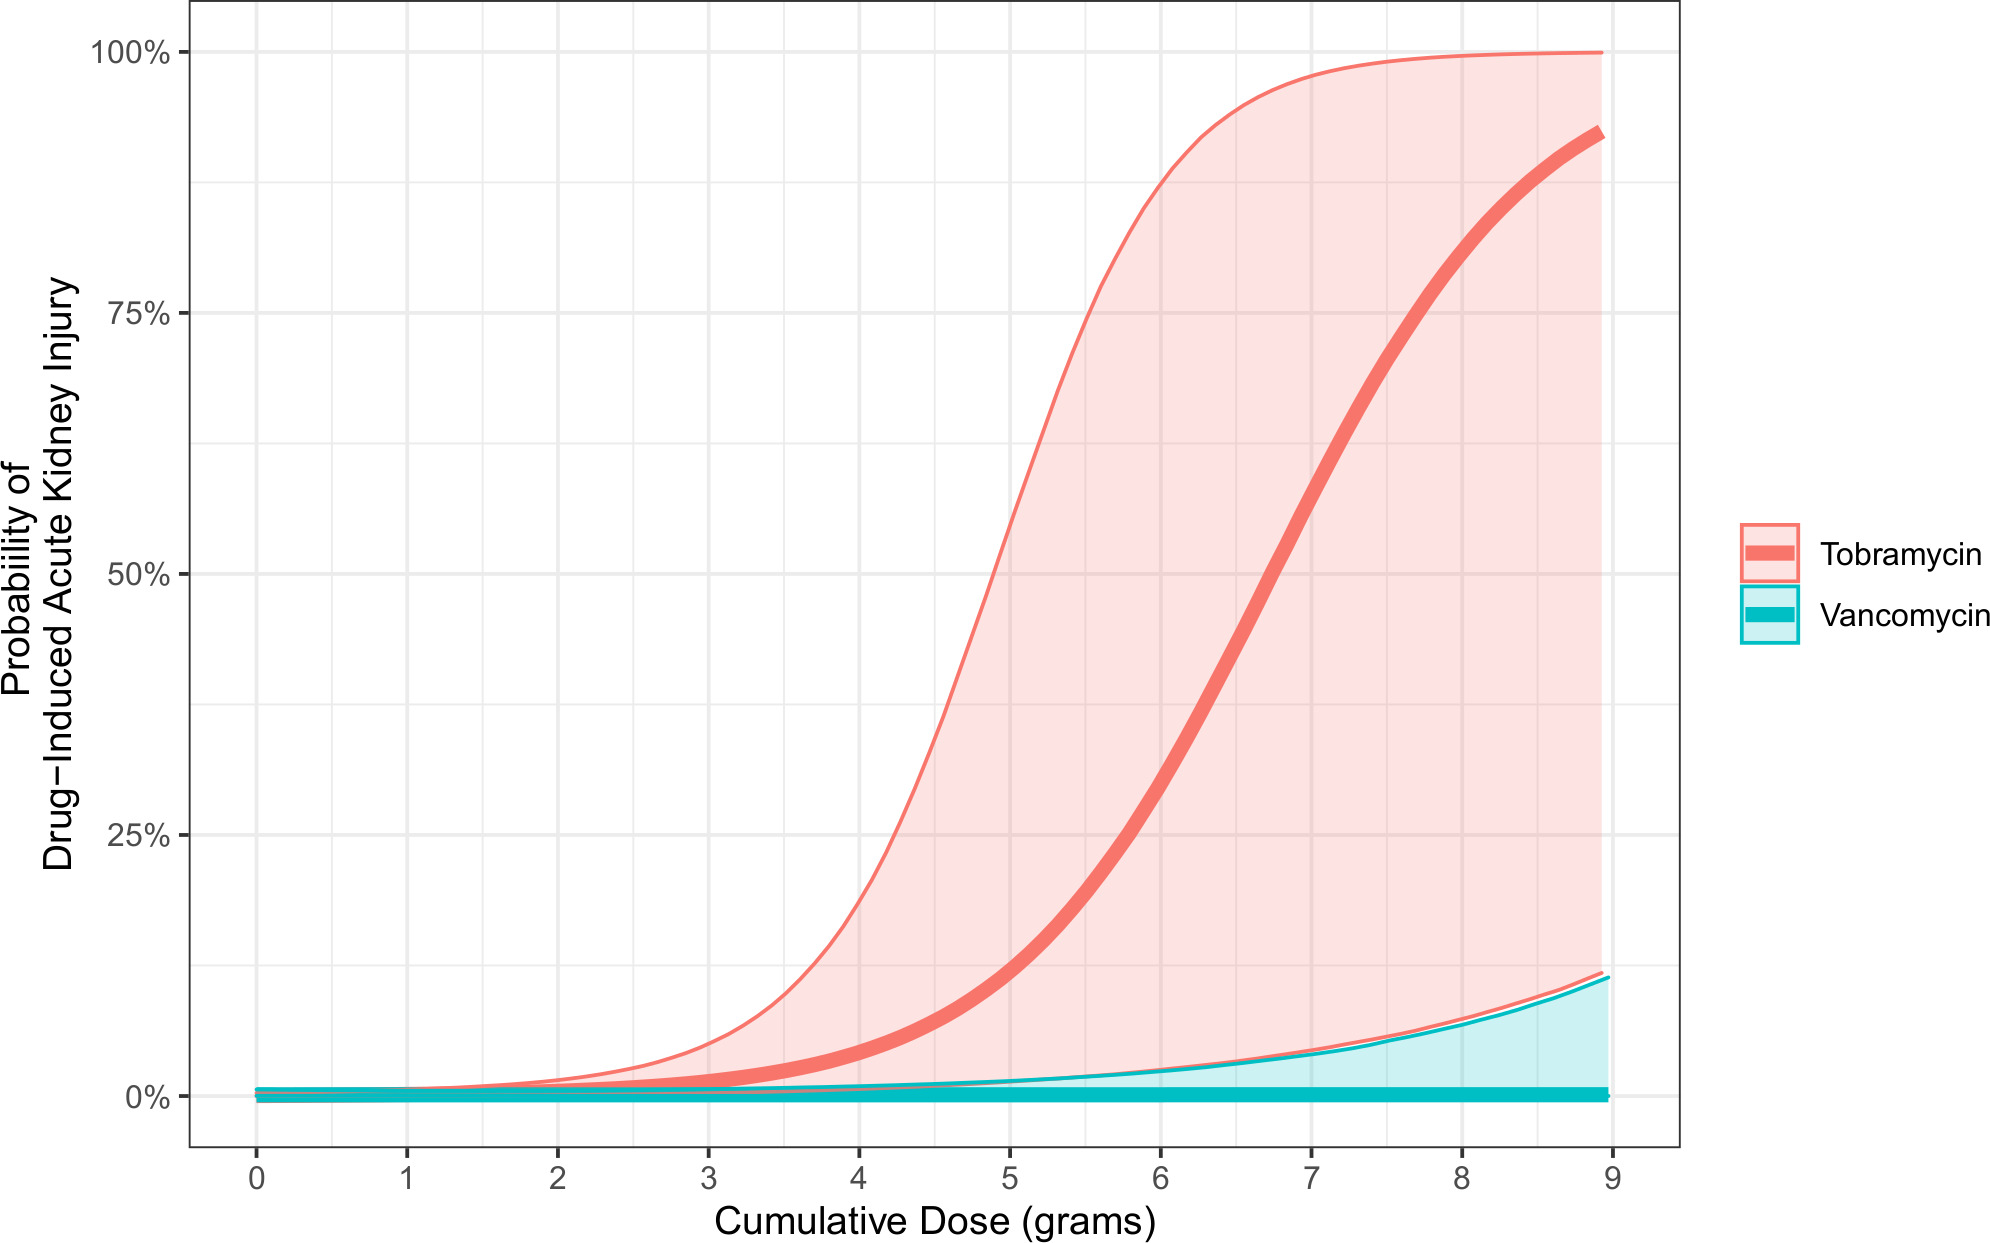 Fig. 2 
          Association of intrawound vancomycin powder and intrawound tobramycin powder cumulative doses with drug-induced acute kidney injury. The estimates were derived using Bayesian modelling conditioned on patient age, sex, and injury severity, and accounted for potential interactive effects between the two antibiotics.
        